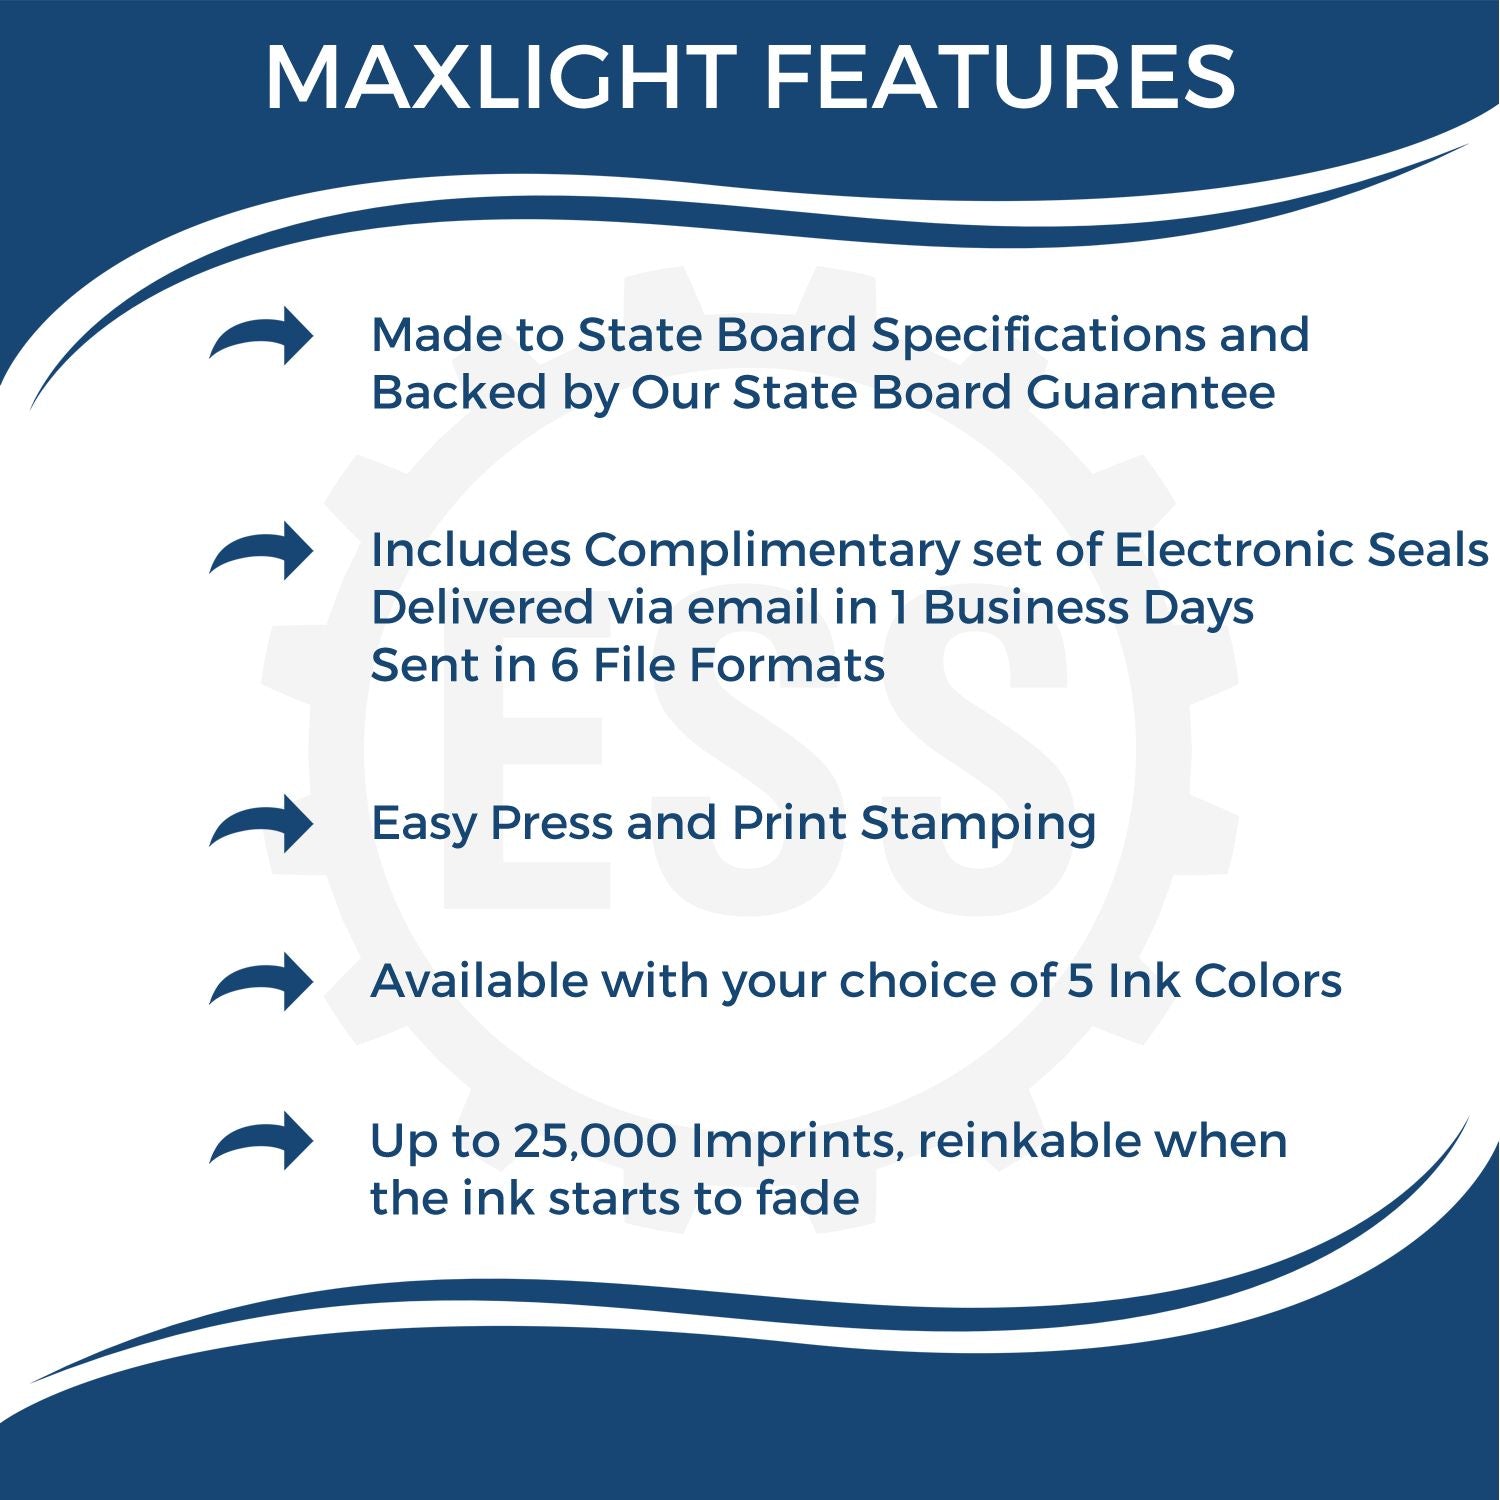 A picture of an infographic highlighting the selling points for the Premium MaxLight Pre-Inked Delaware Engineering Stamp